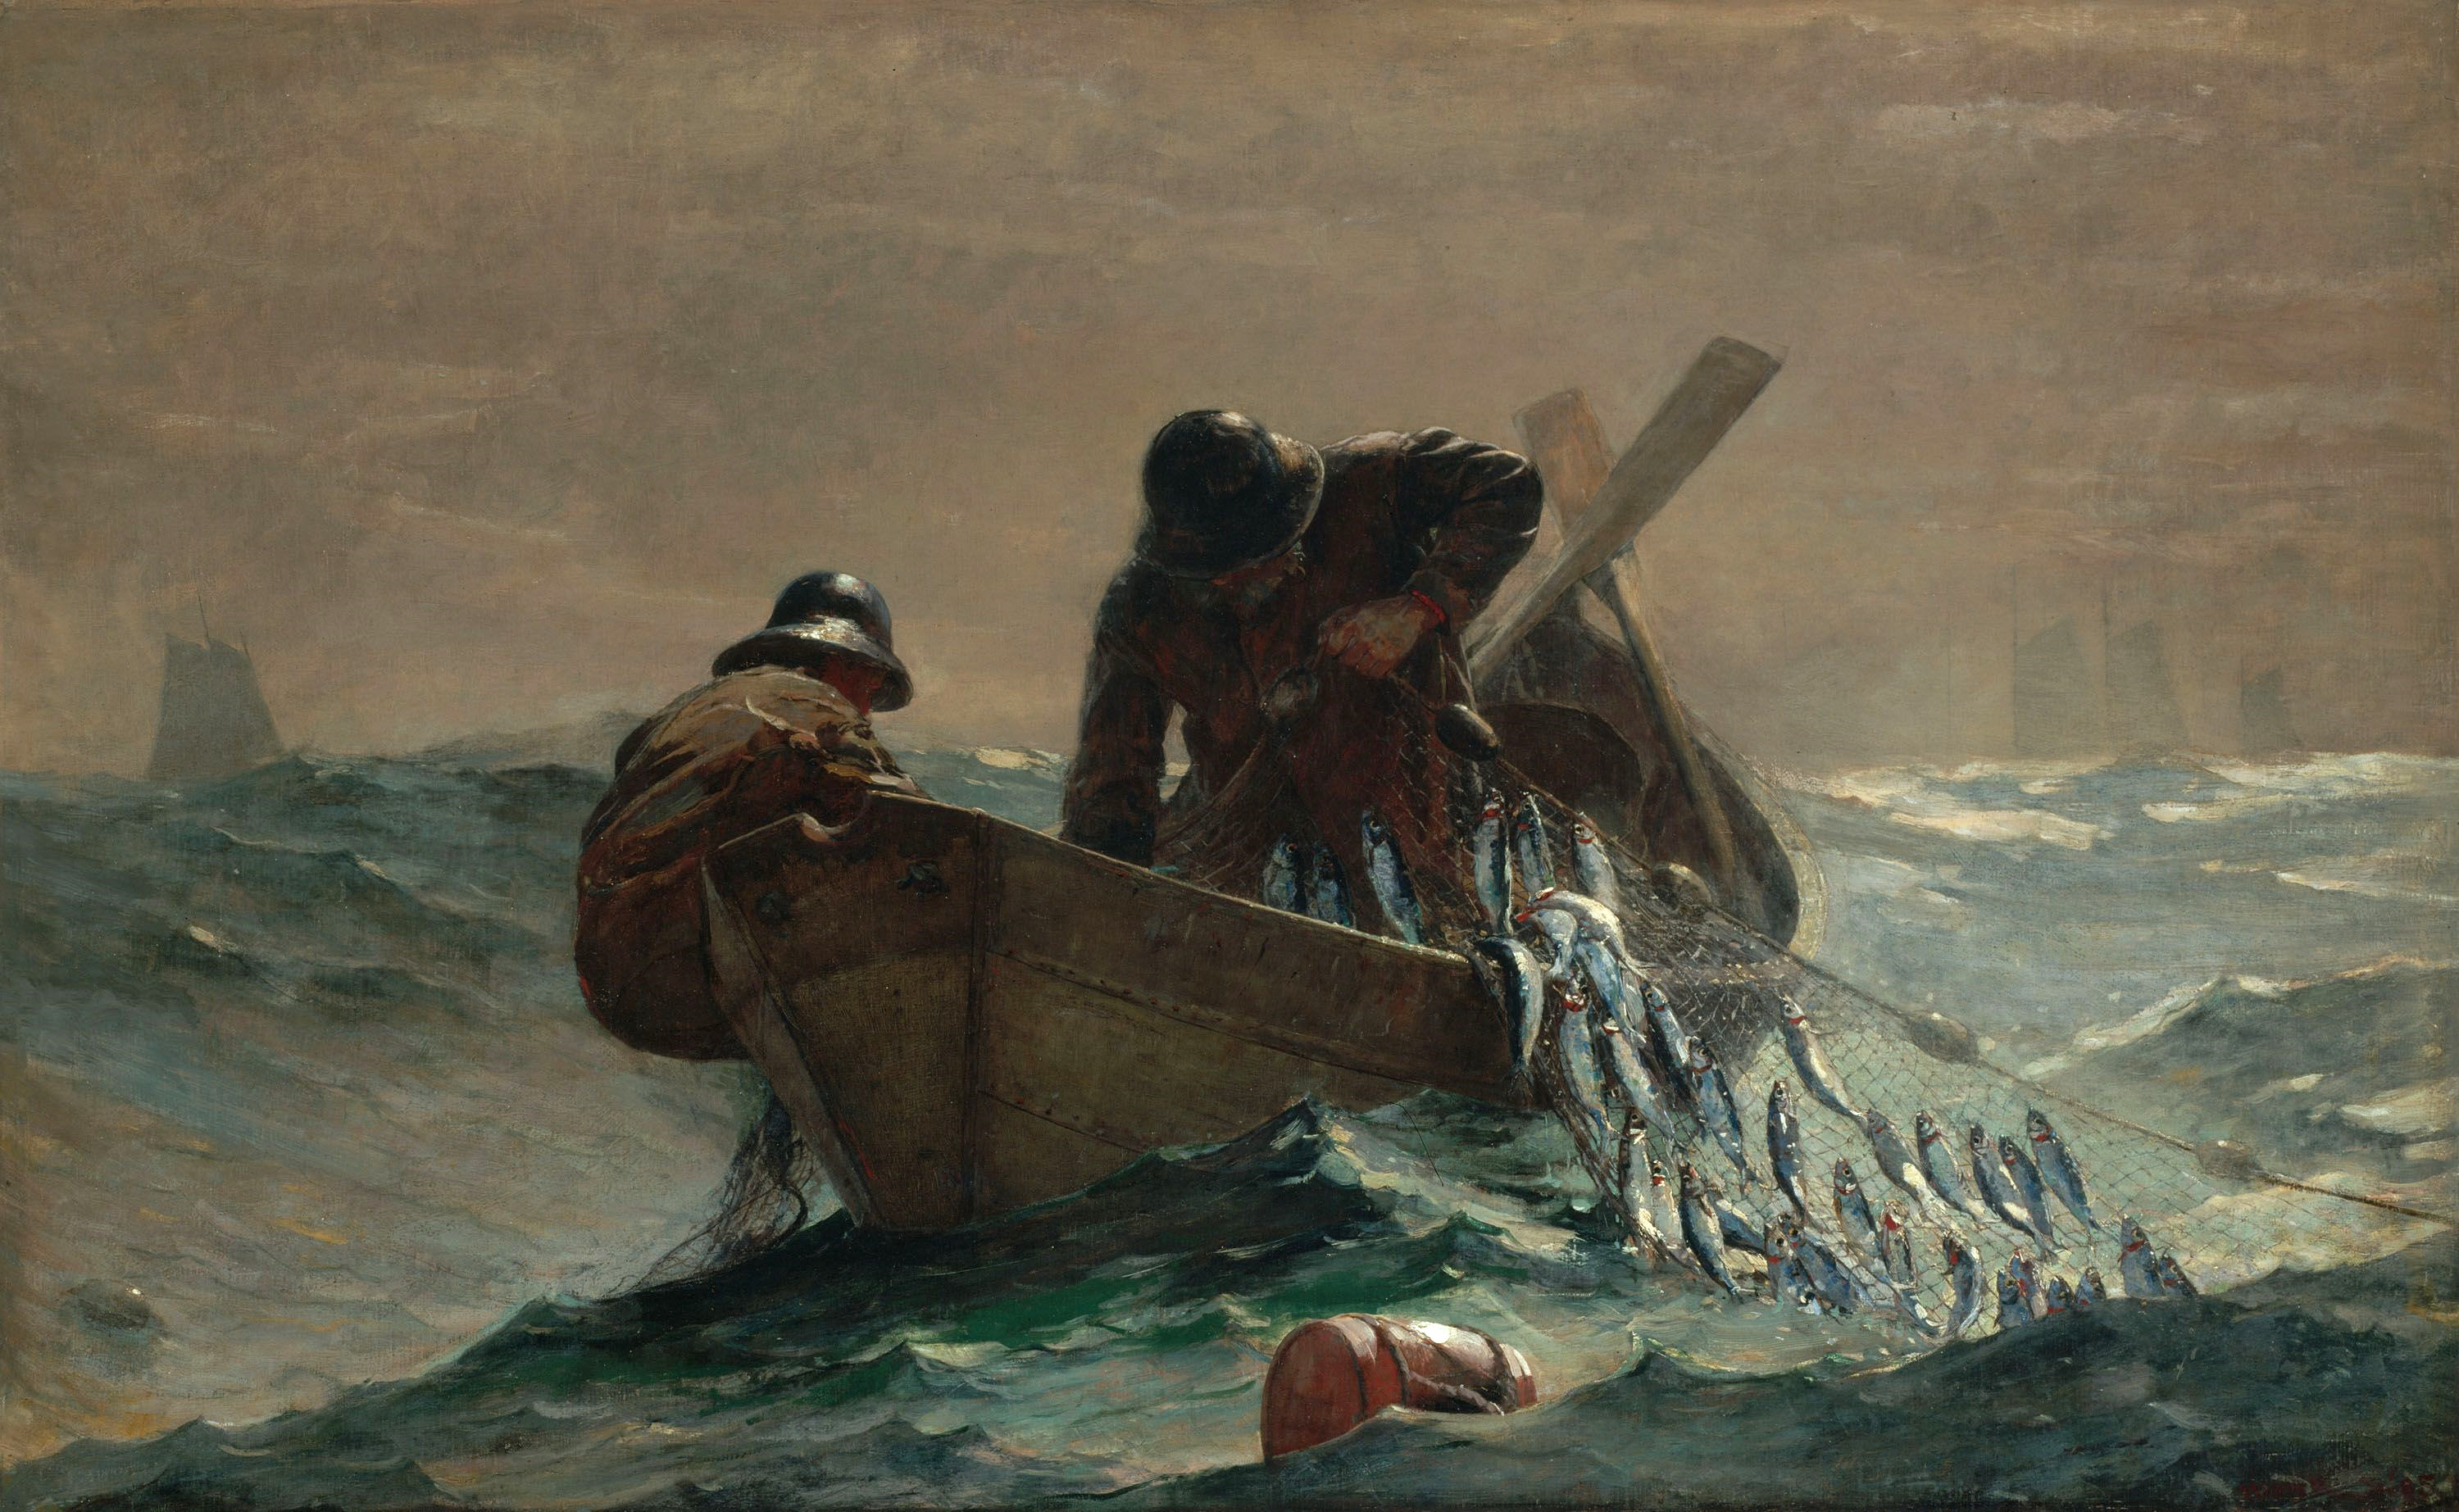 Artistic Painting HD Wallpaper by Winslow Homer